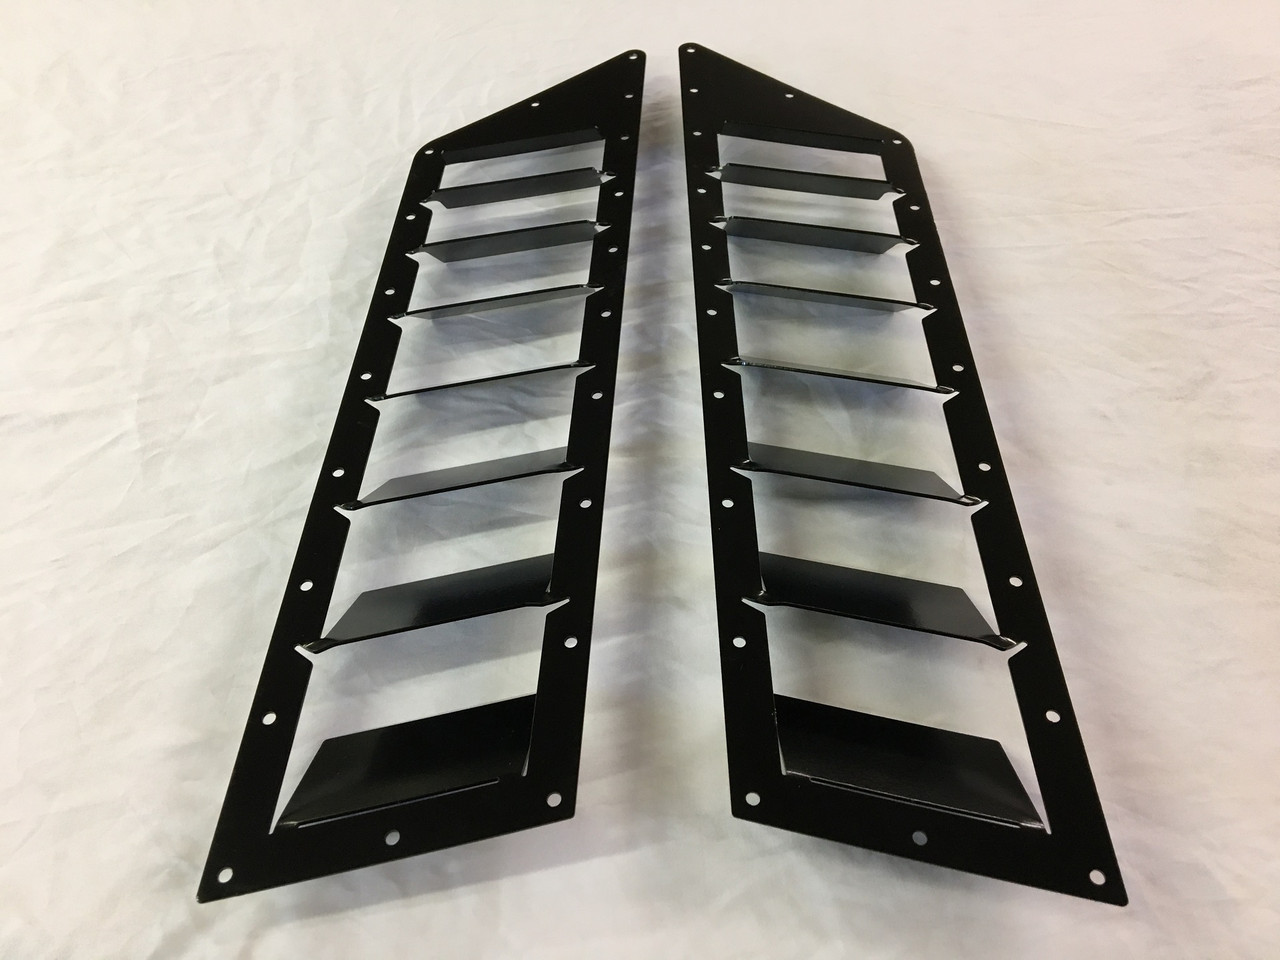 Race Louver Mustang RS trim center car hood vent designed for street, high performance driving and light track duty